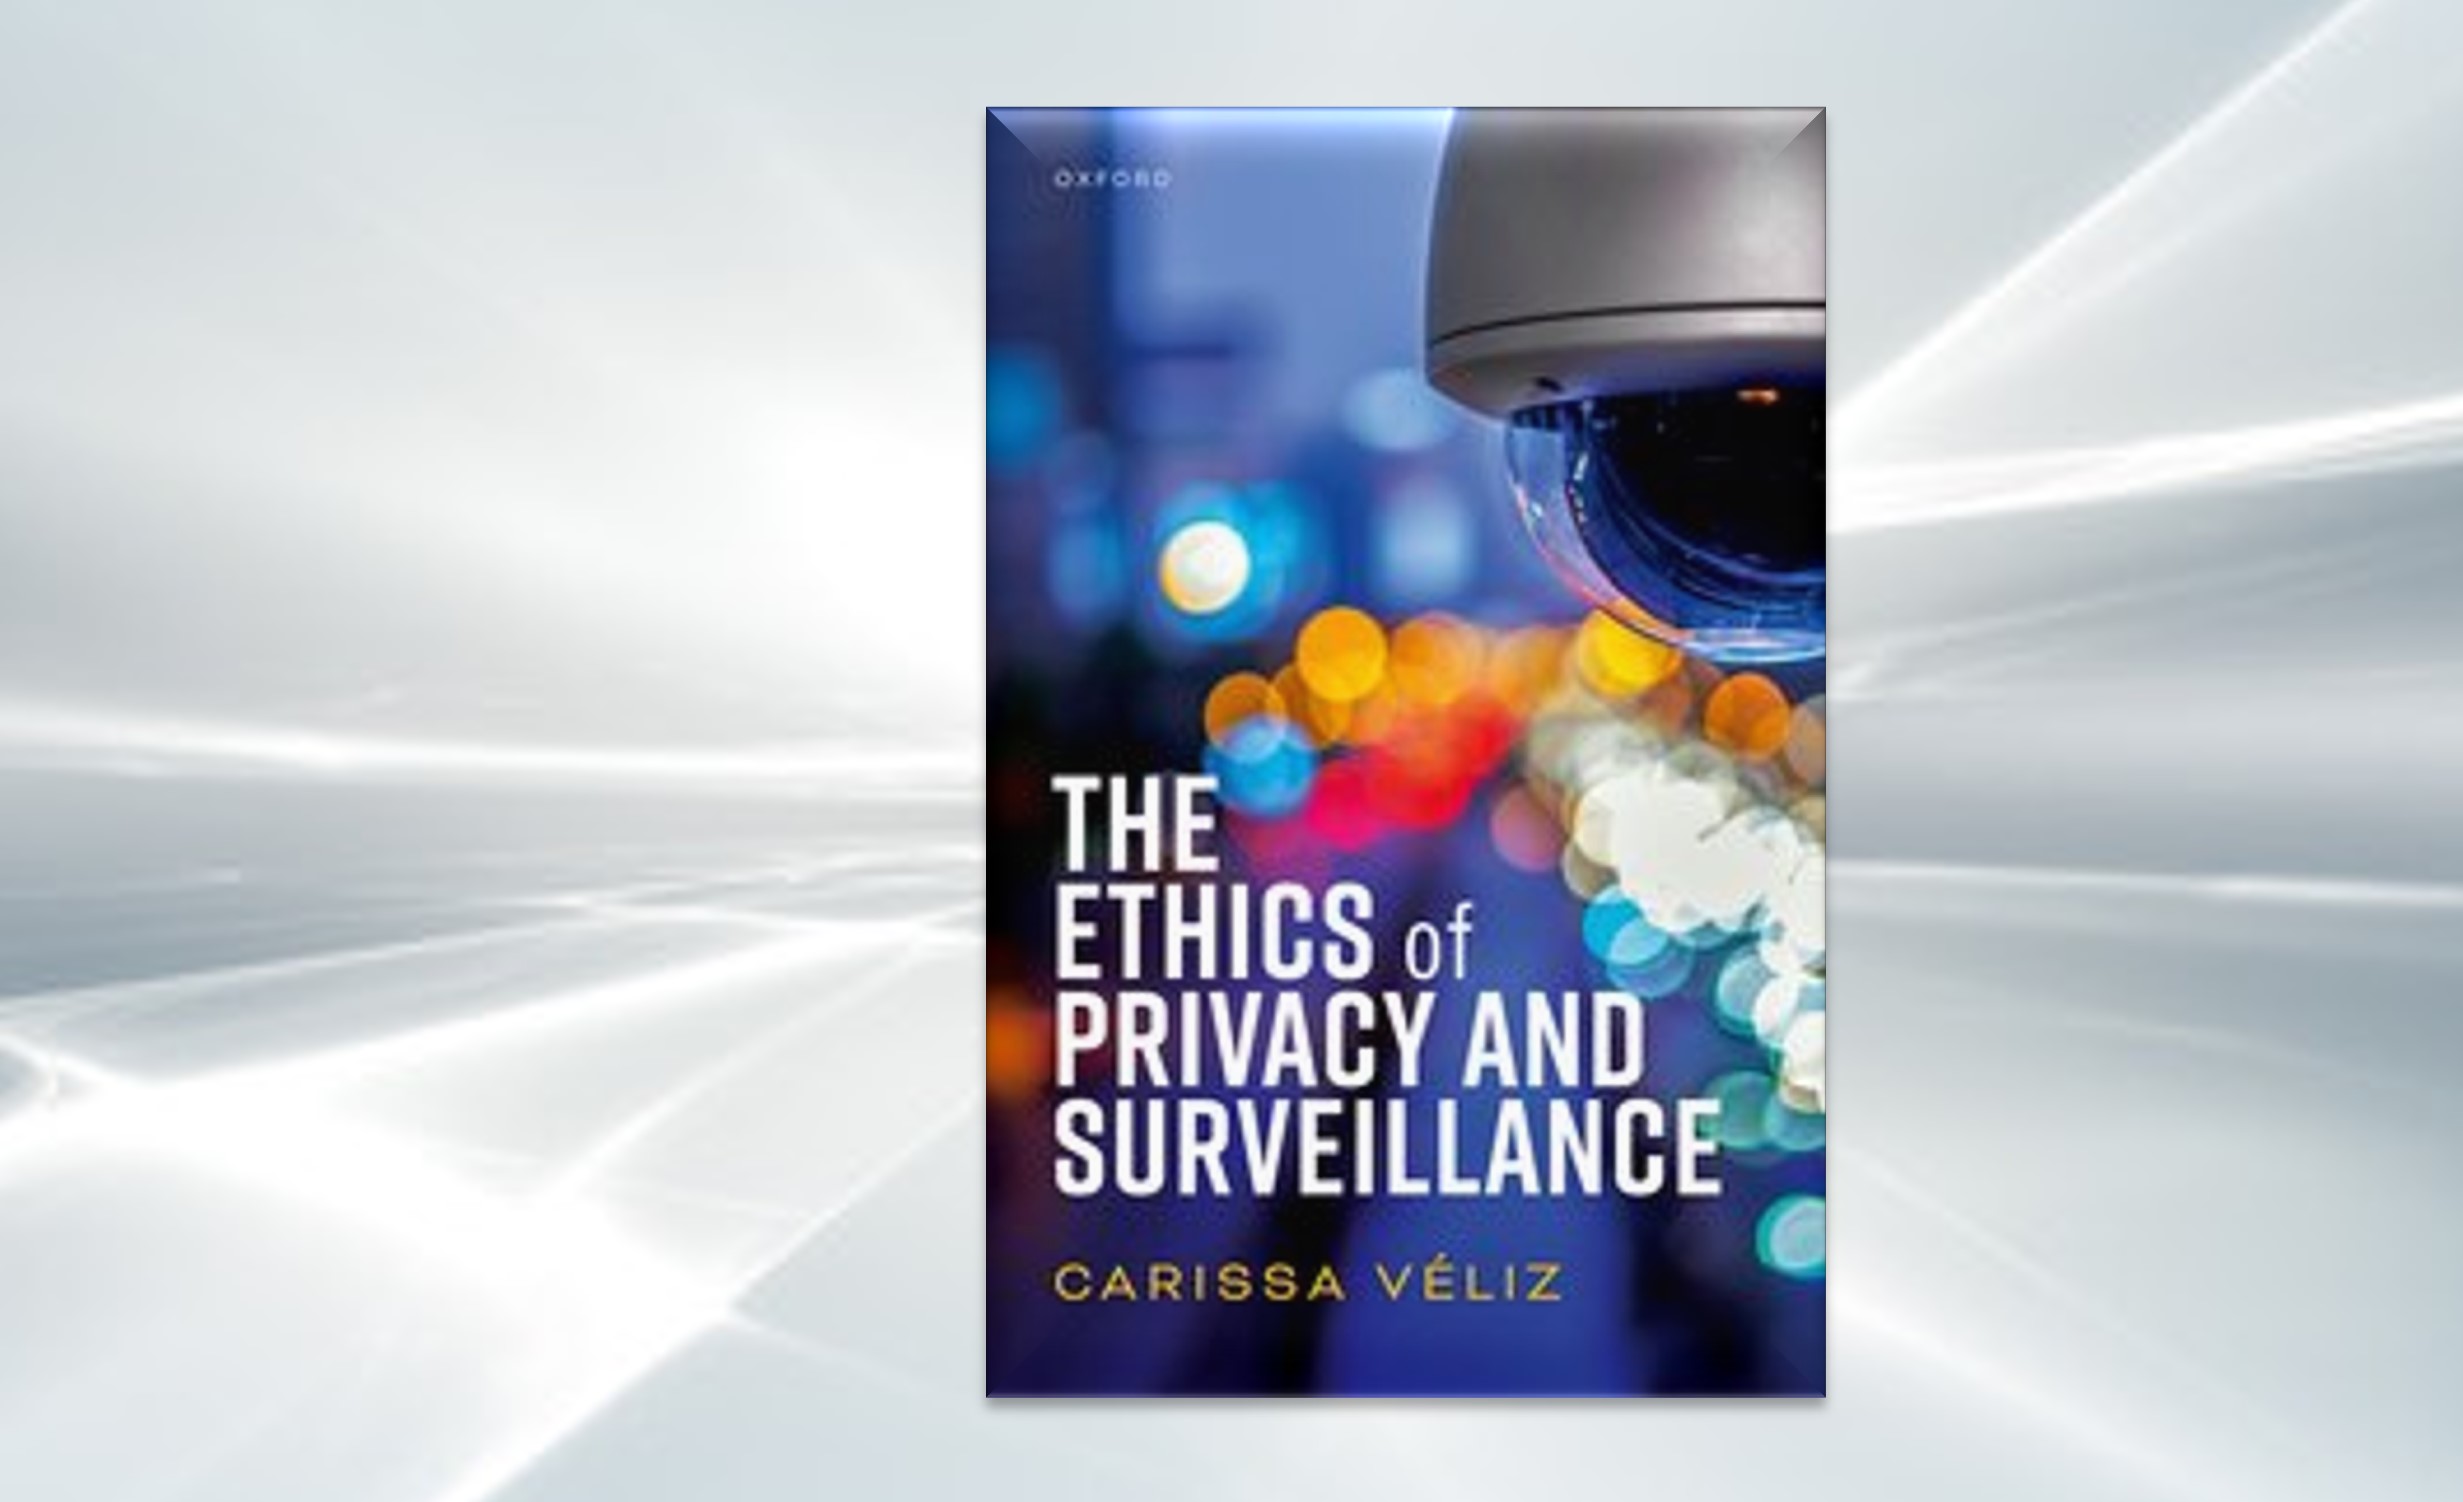 The Ethics of Privacy and Surveillance book cover on a grey and white background from Adobe Stock Images